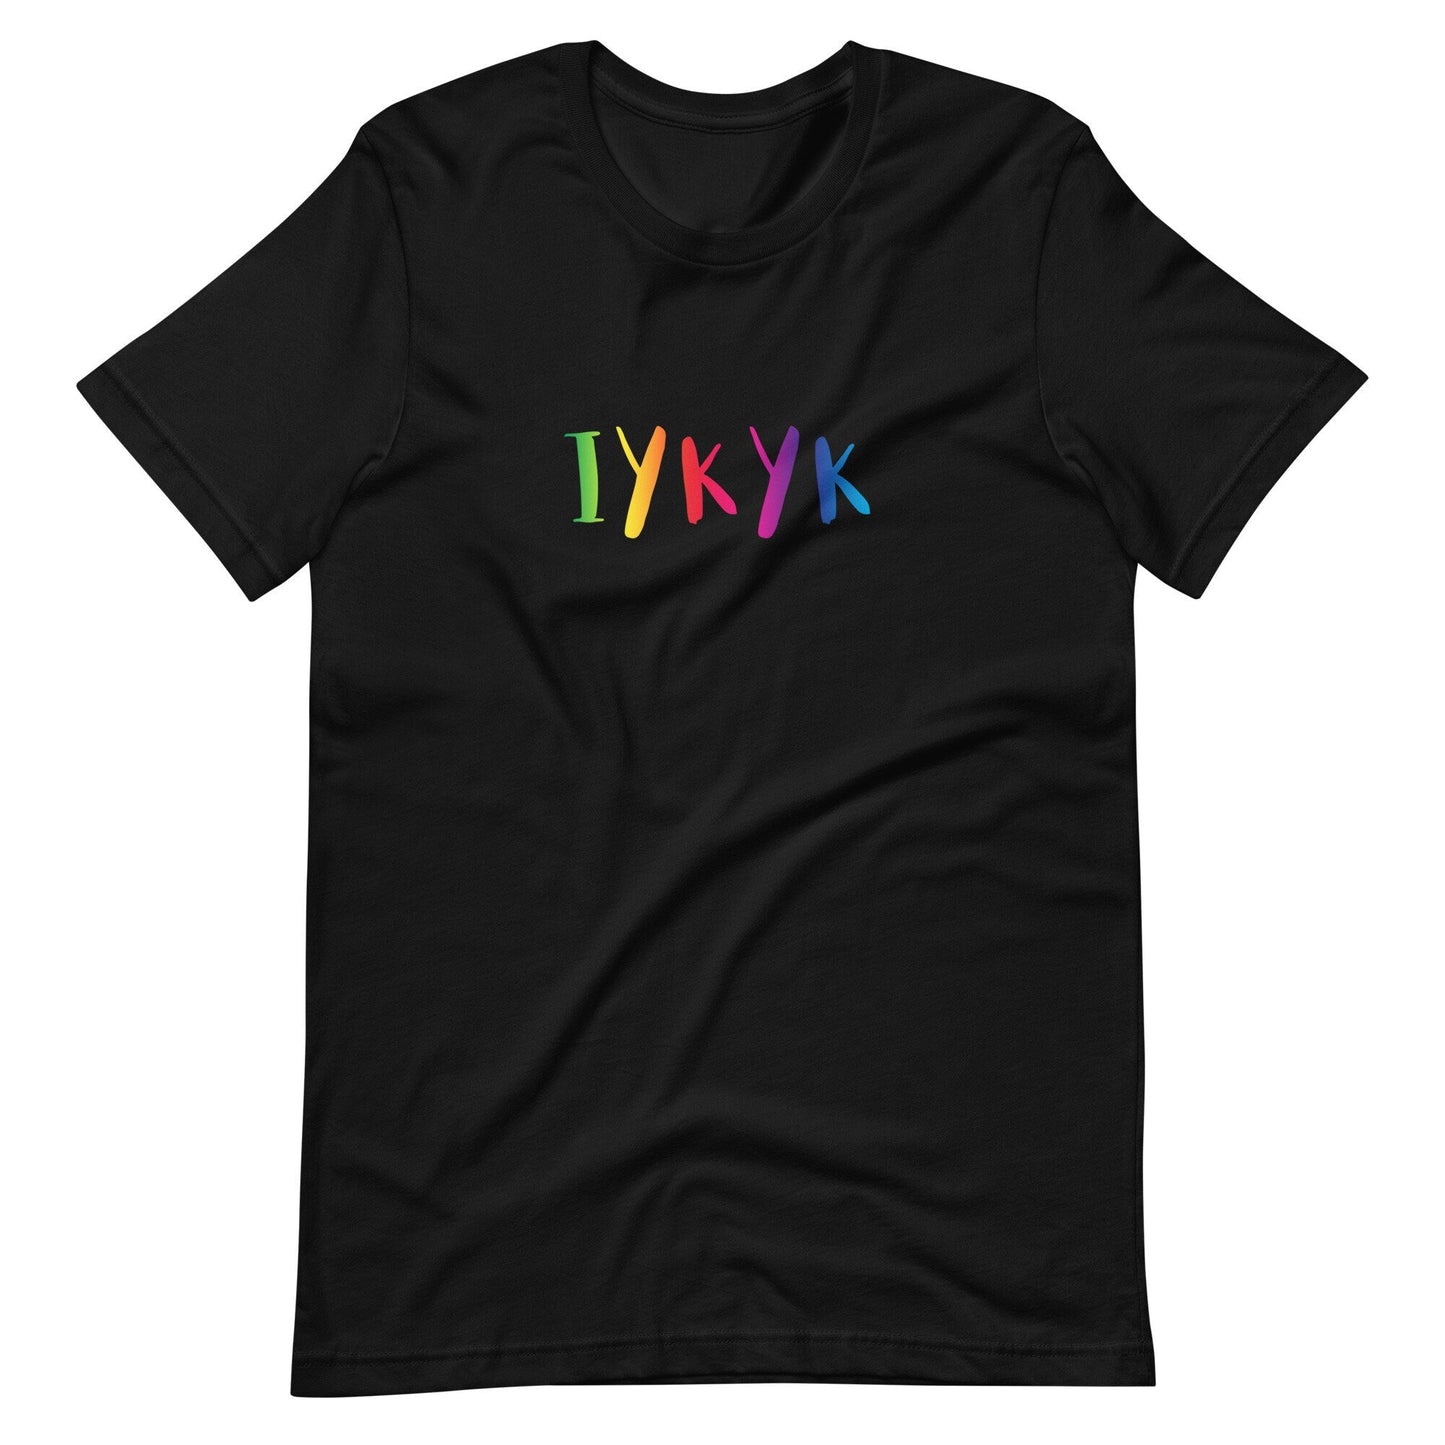 IYKYK If you know you know Trending Internet Social Media Phrase Unisex t-shirt - ActivistChic